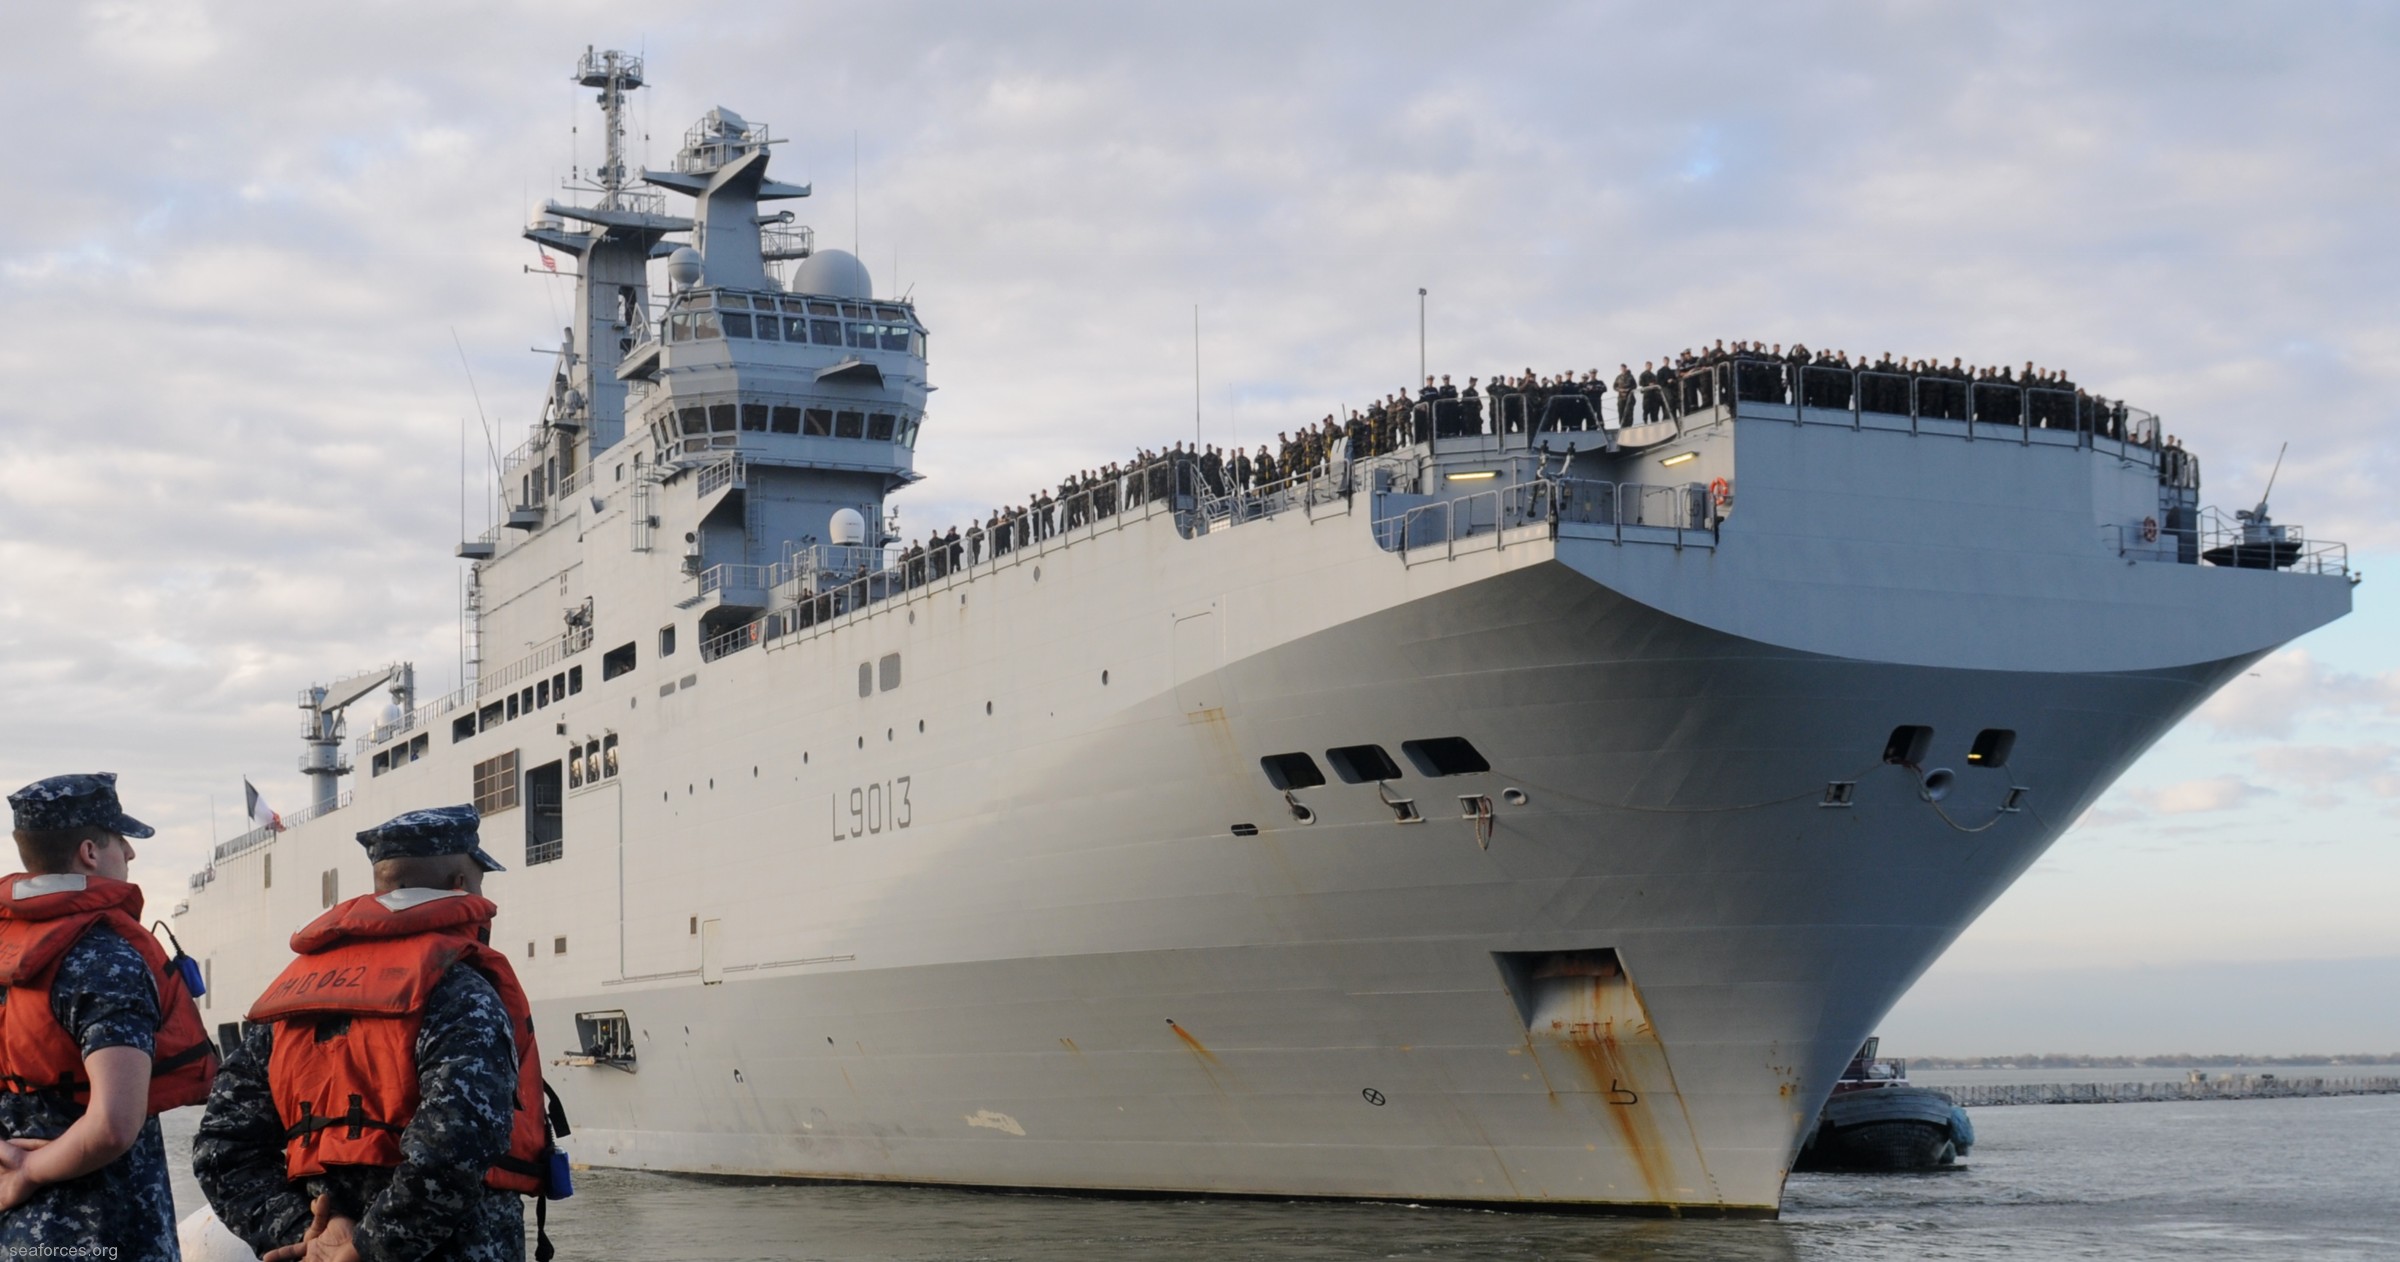 l-9013 fs mistral amphibious assault command ship french navy marine nationale 30